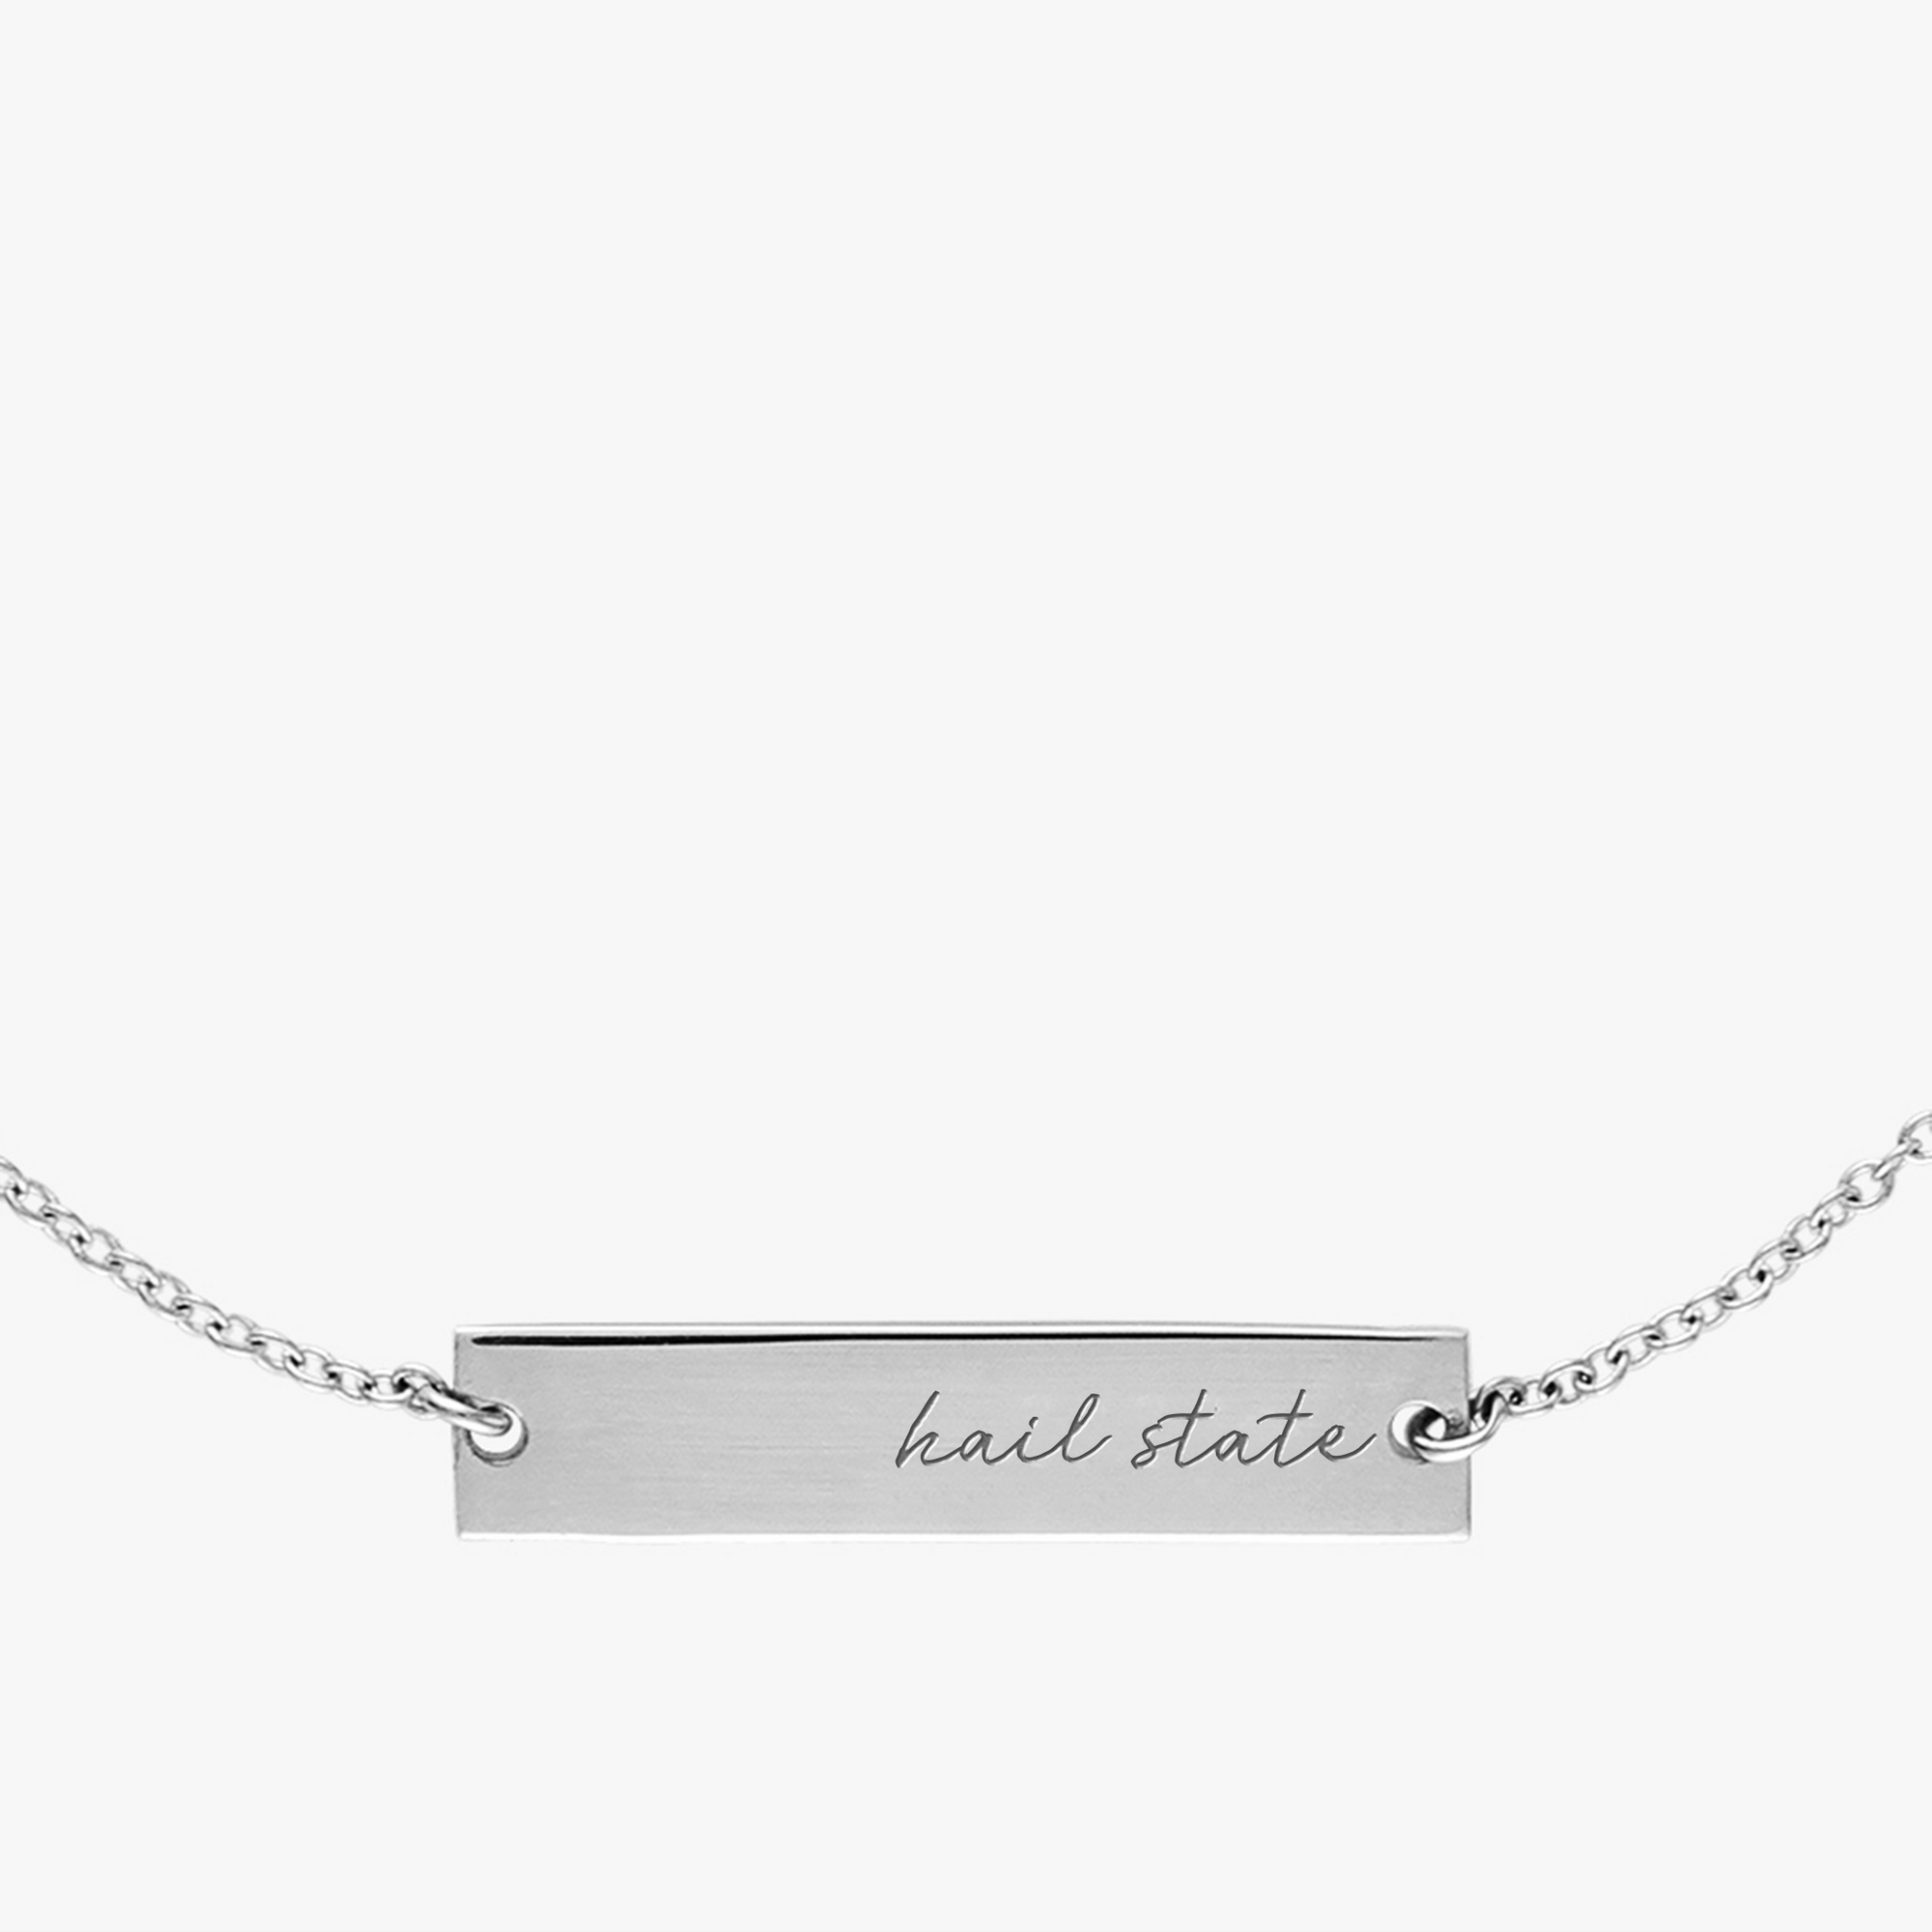 Mississippi State Horizontal Necklace Sterling Silver Close Up